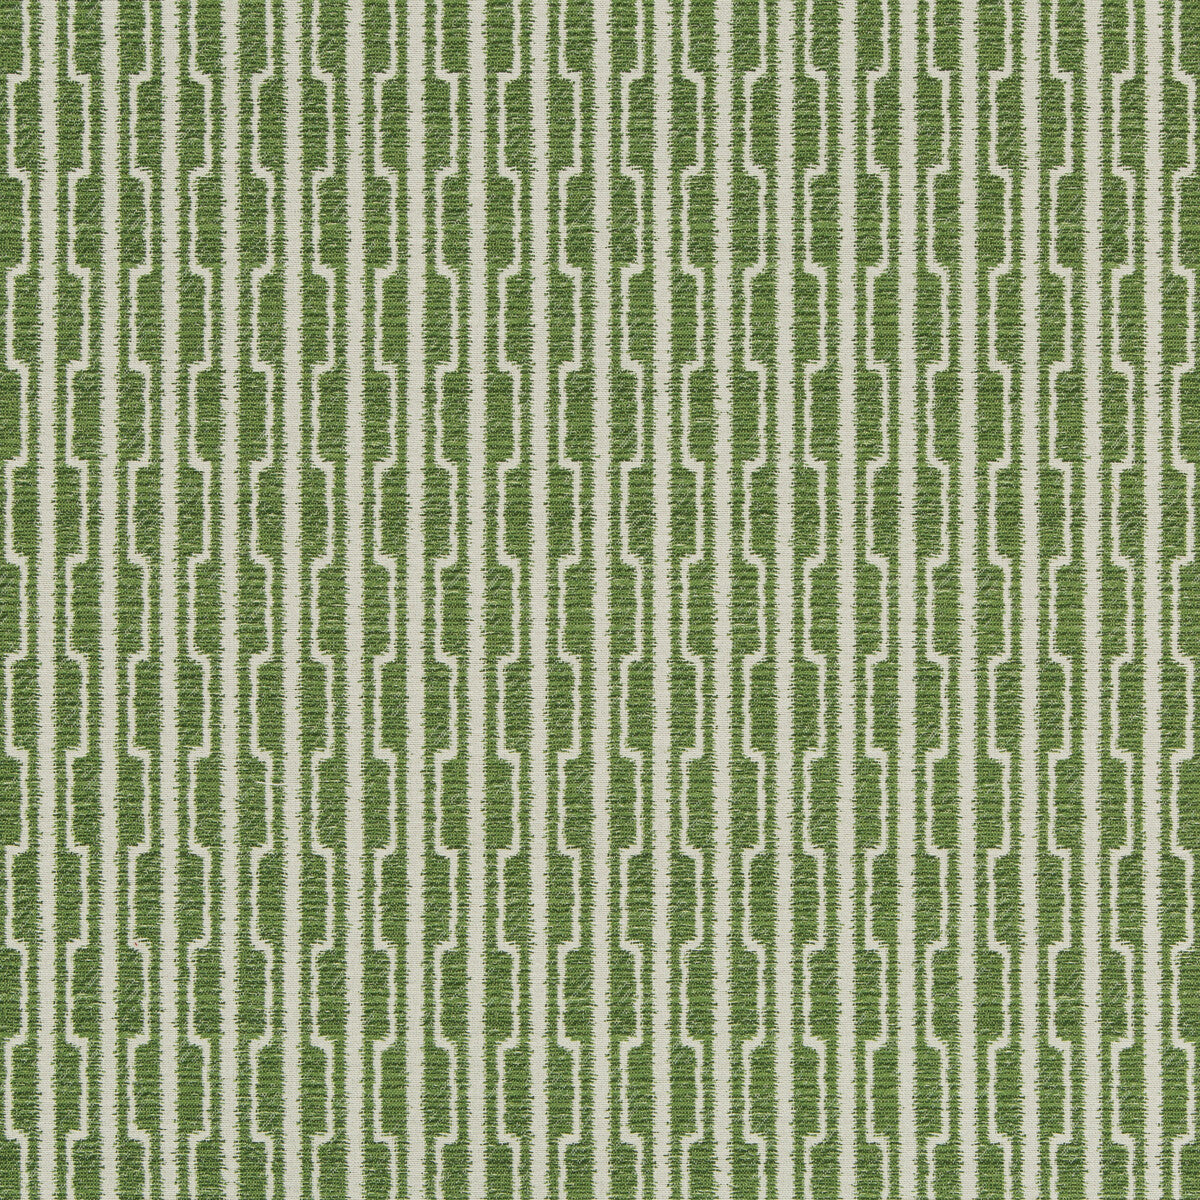 Kravet Design fabric in 36084-31 color - pattern 36084.31.0 - by Kravet Design in the Inside Out Performance Fabrics collection